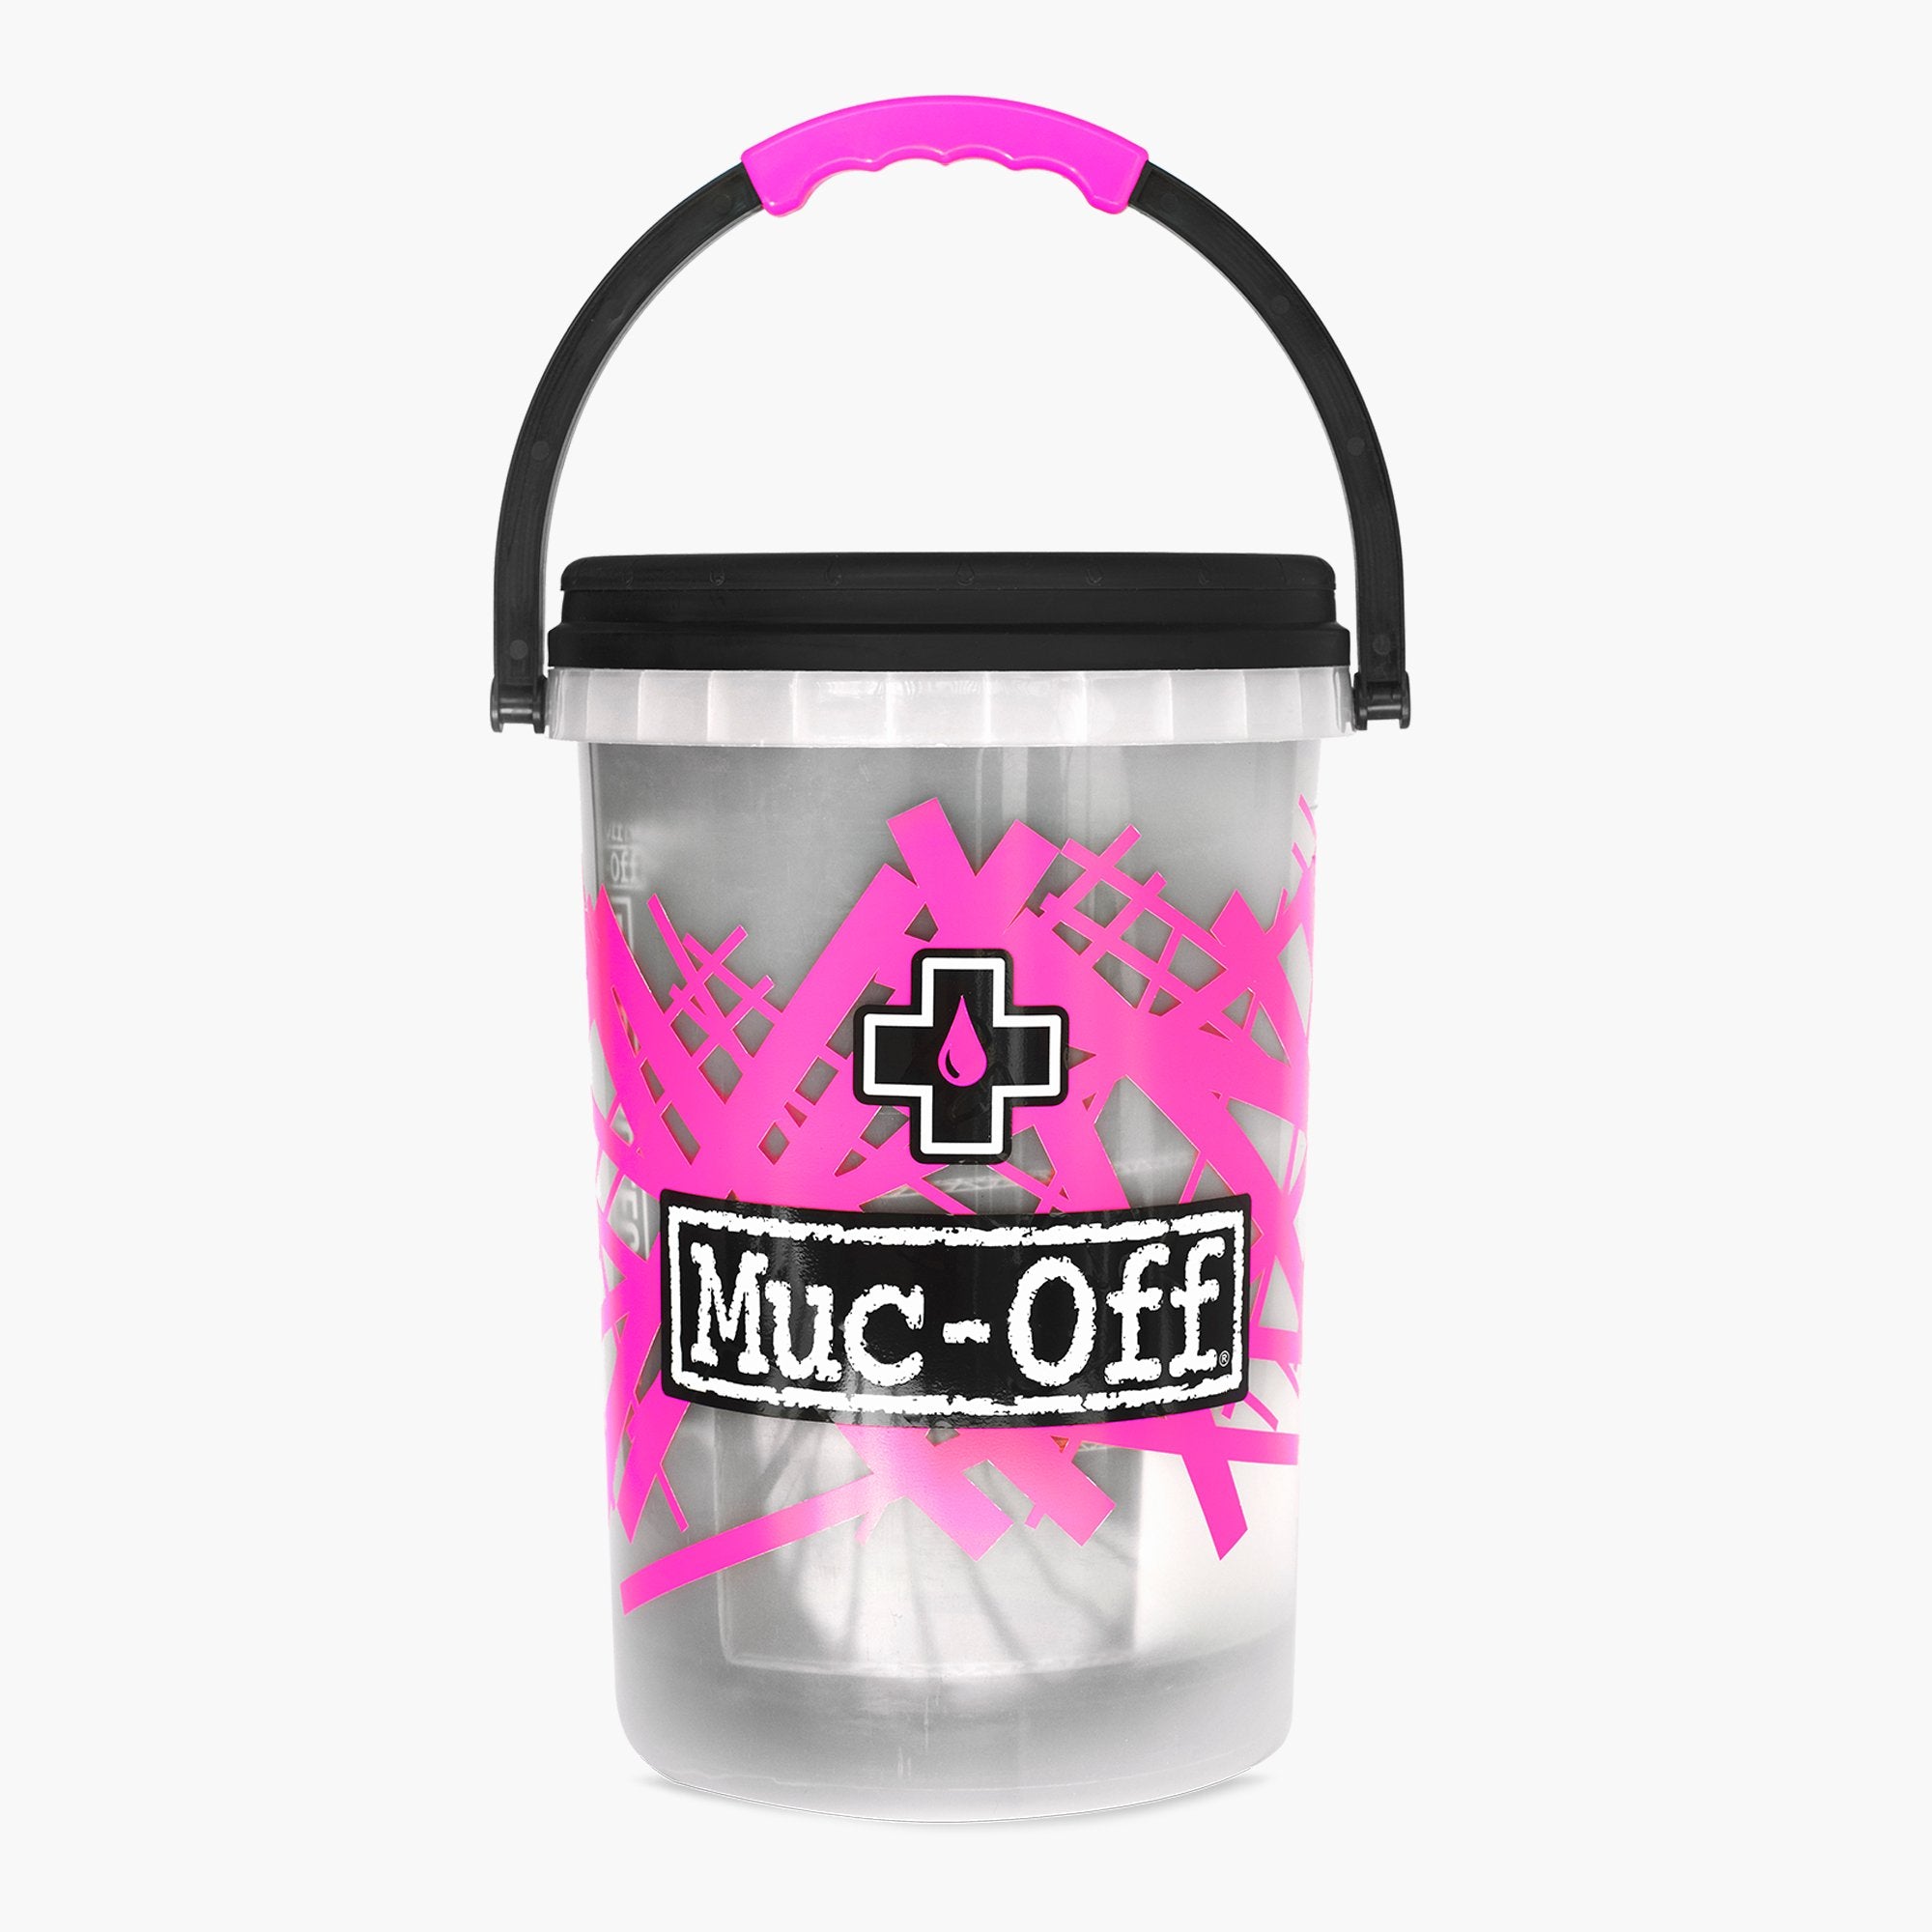 Muc-Off Dirt Bucket w/Filth Filter Motorcycle Care Kit (20629) 